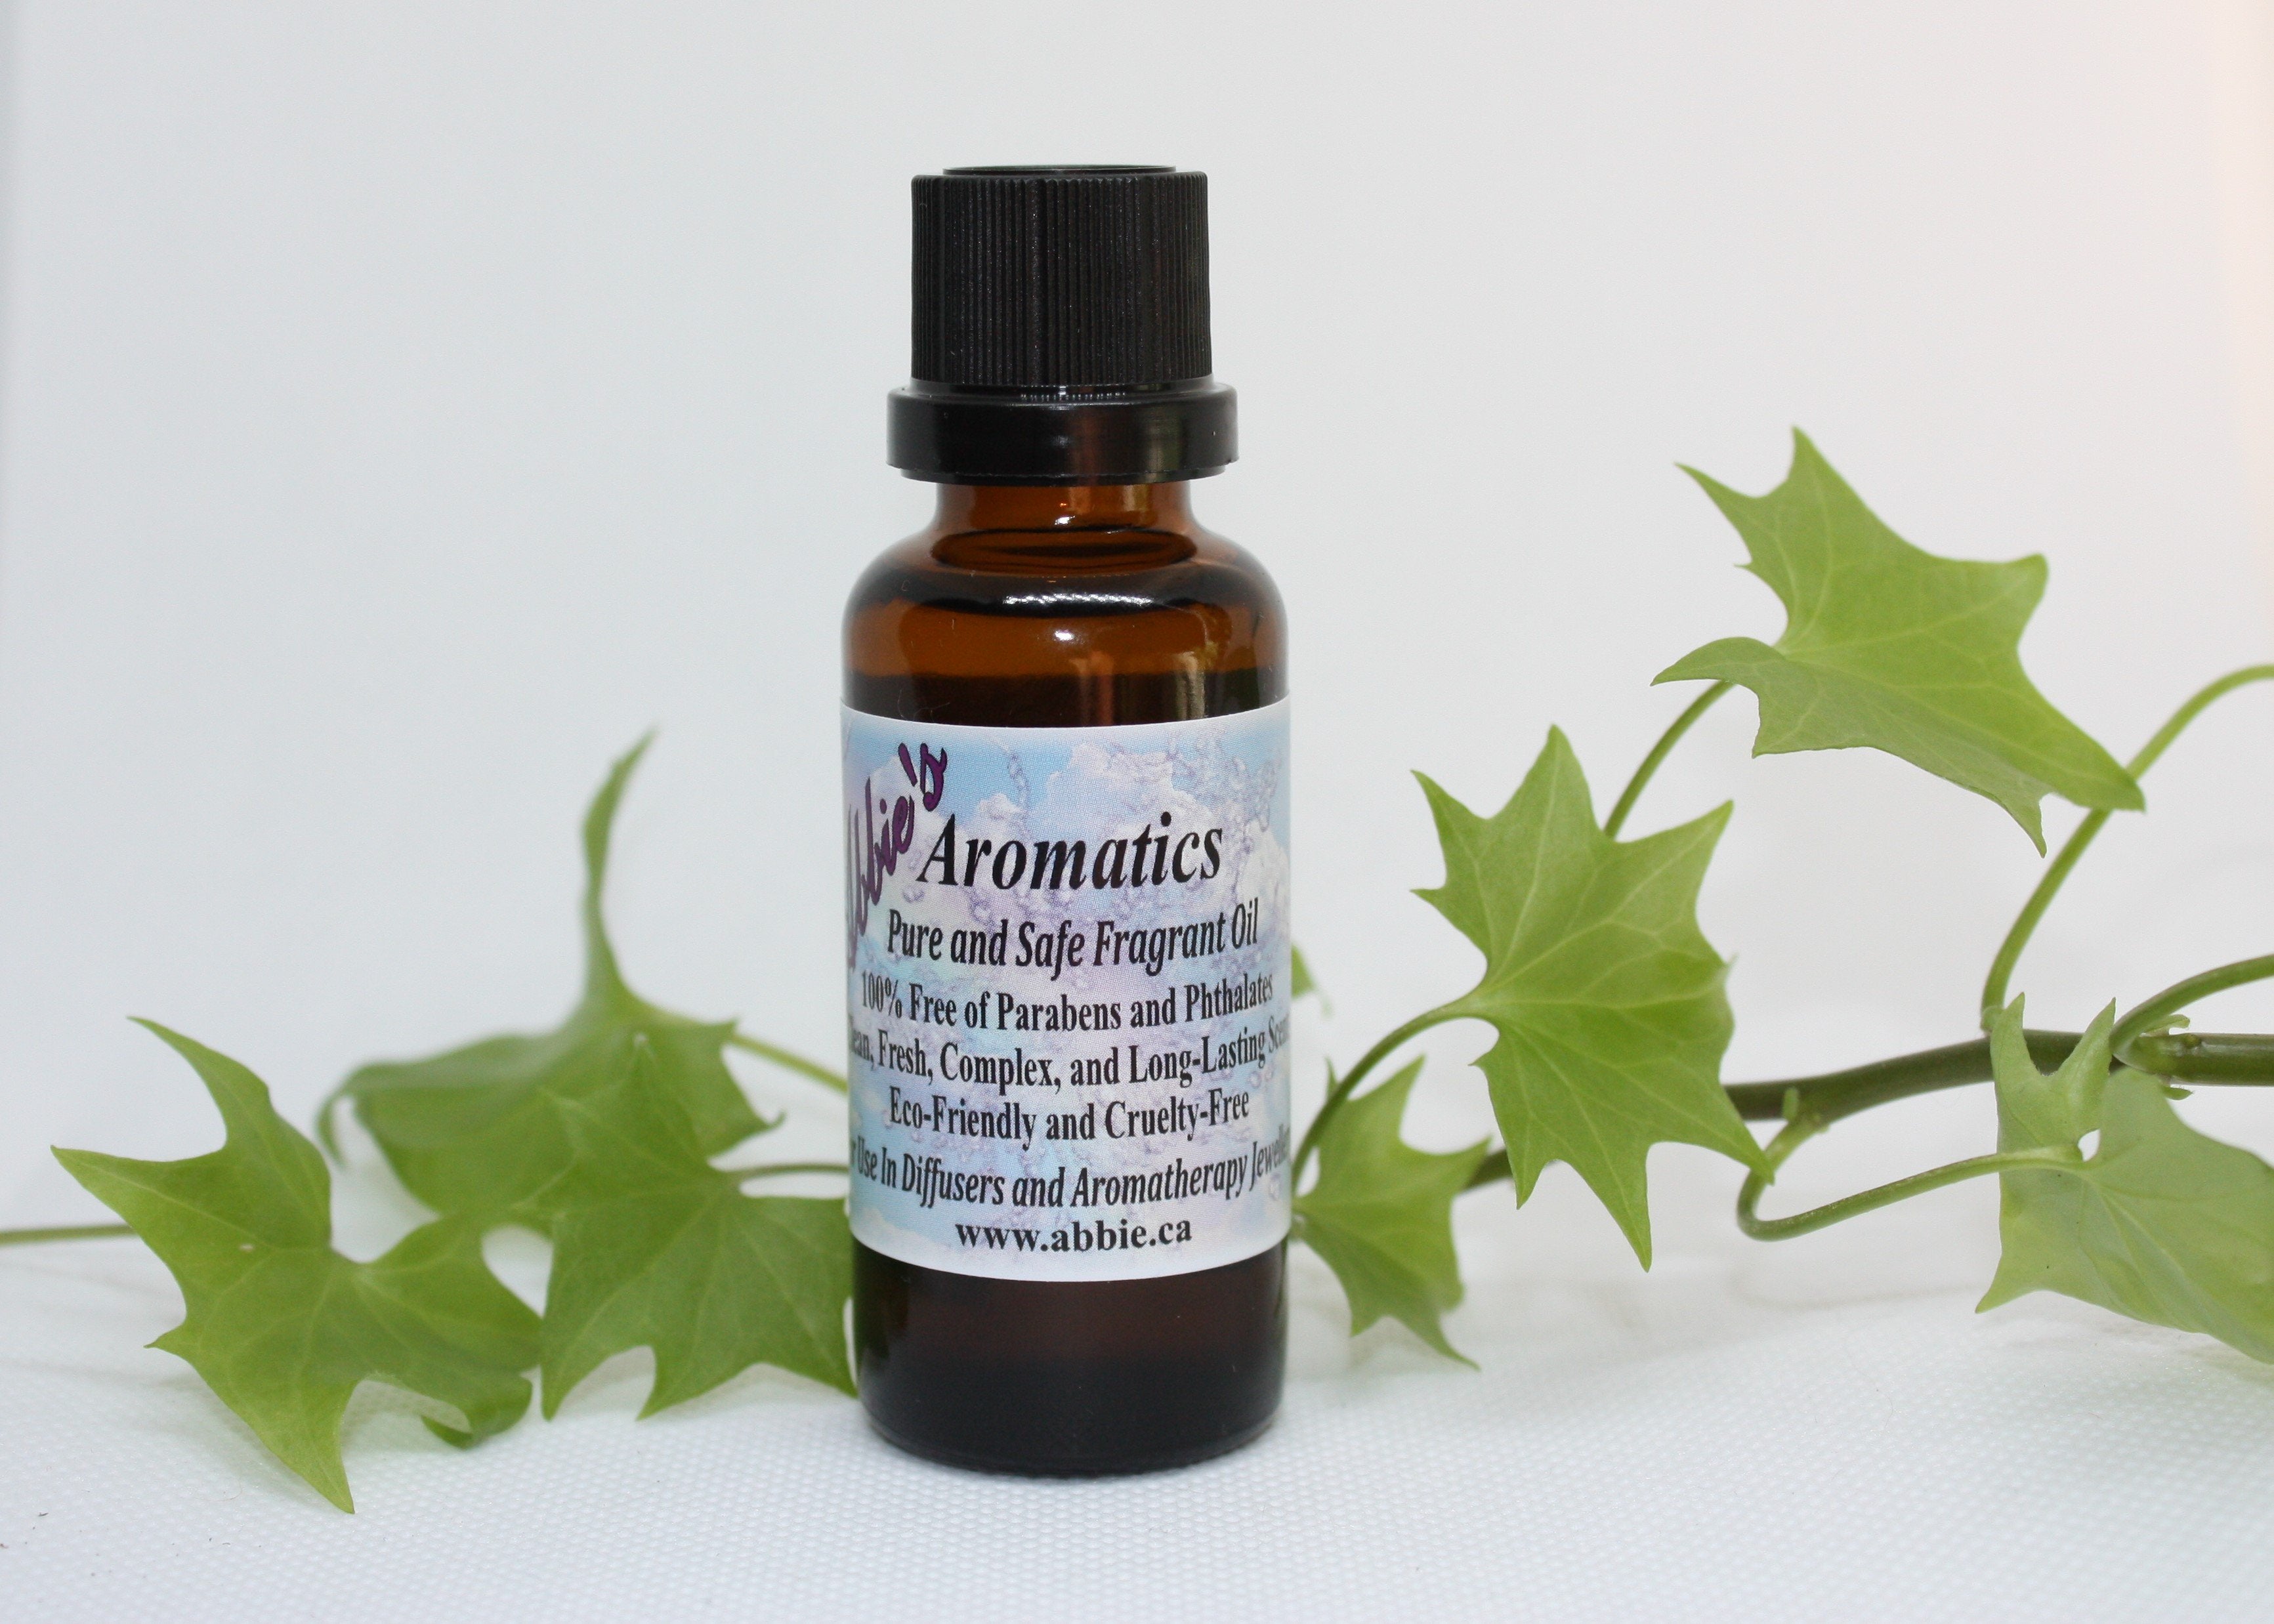 Aromatics 30ml - Abbie's Natural Skin Care Products